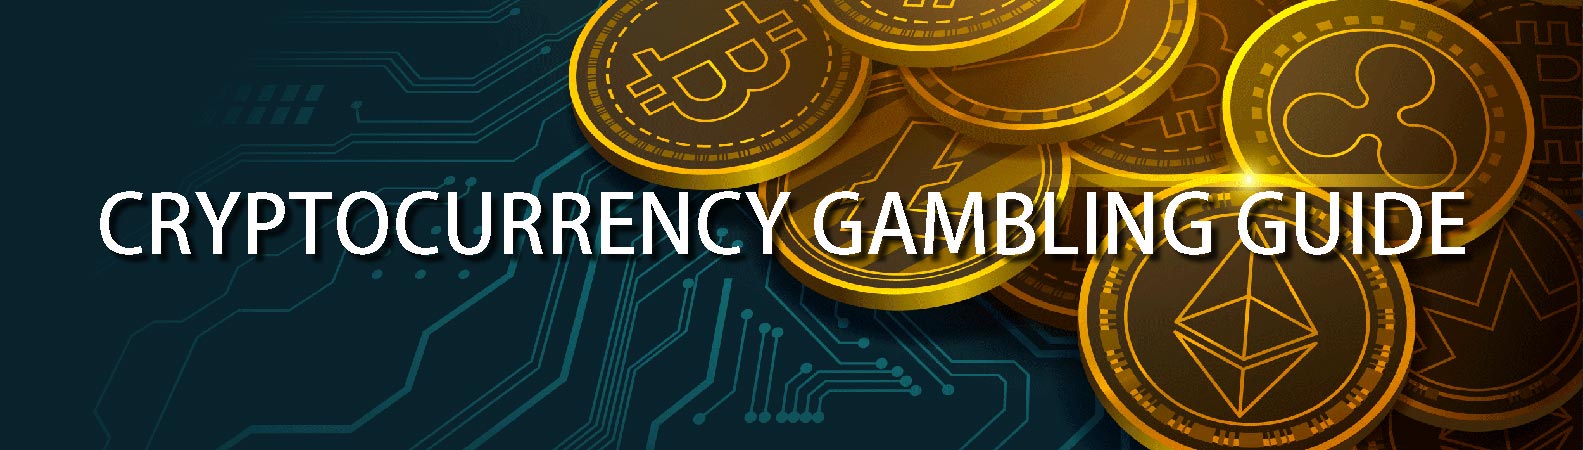 beat online cryptocurrency casinos canada